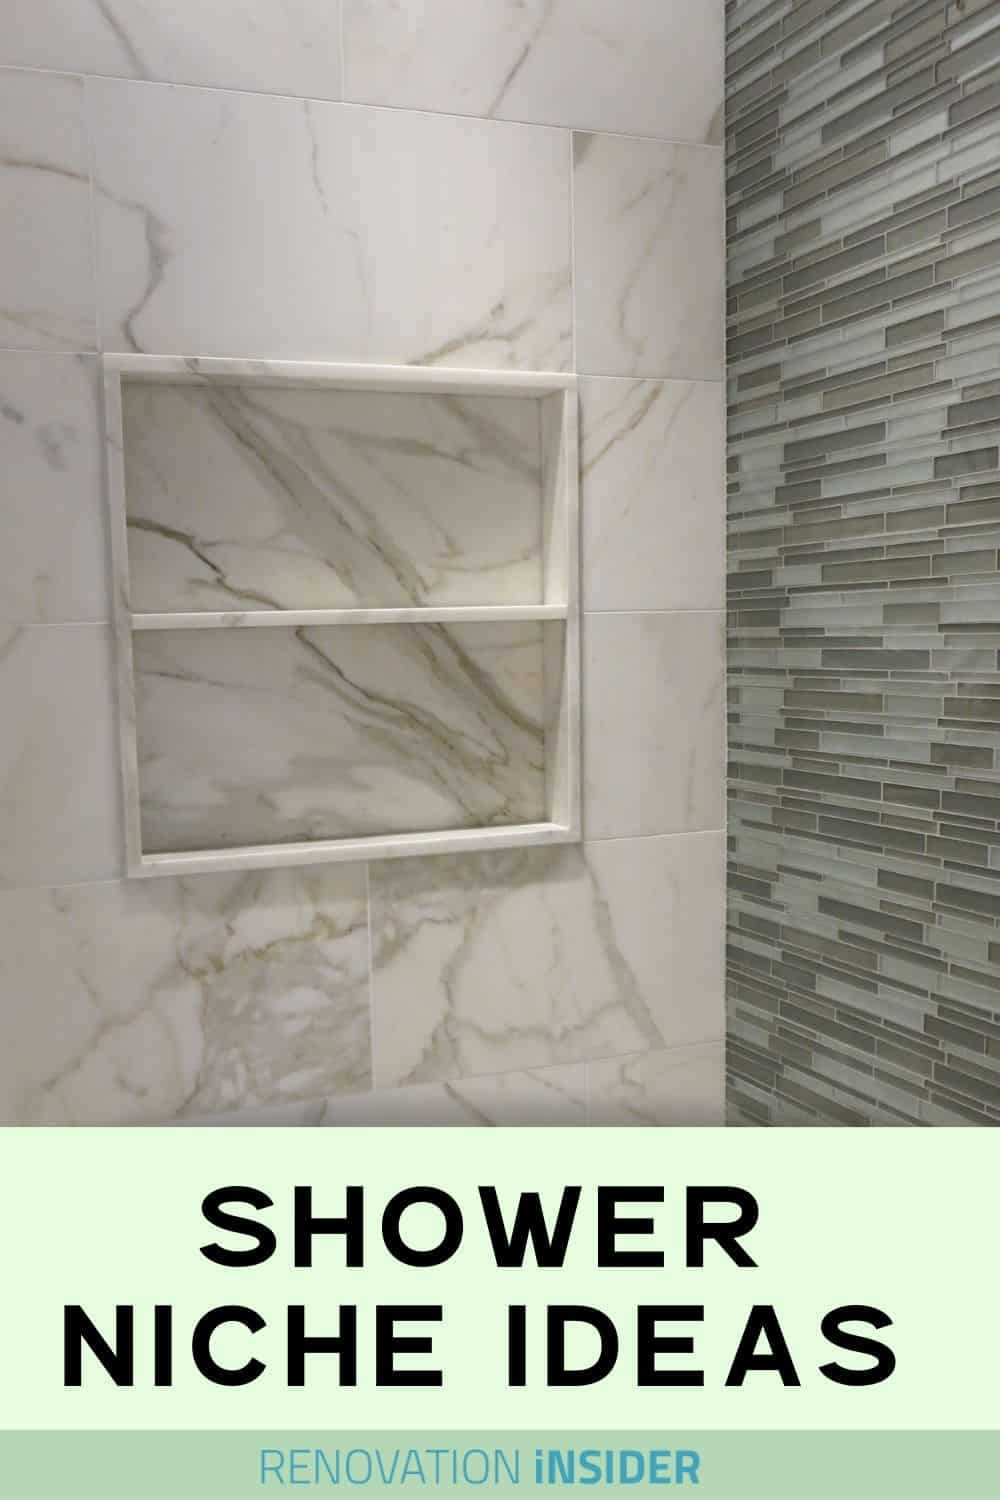 Step-by-step guide to installing a shower niche